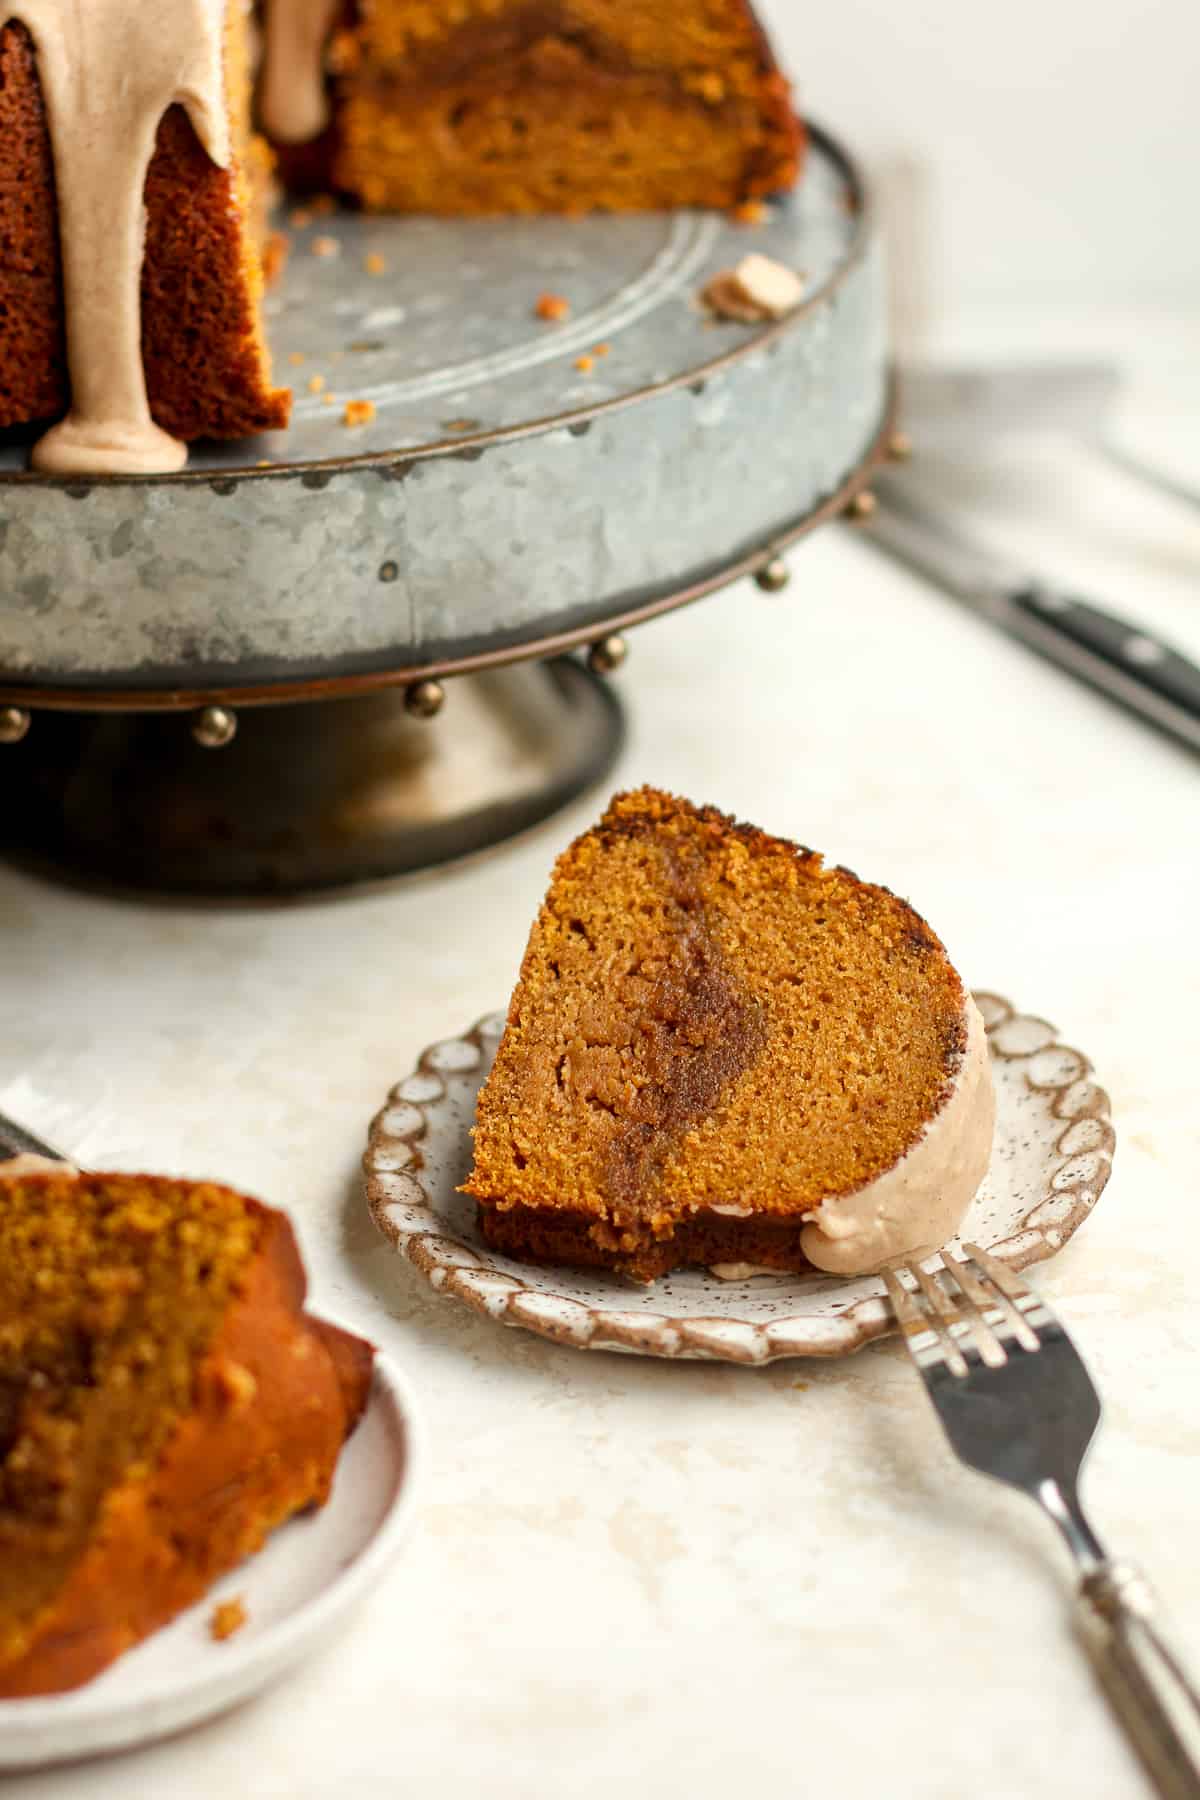 Side view of slices of pumpkin bundt cake with the cake tray in the background.